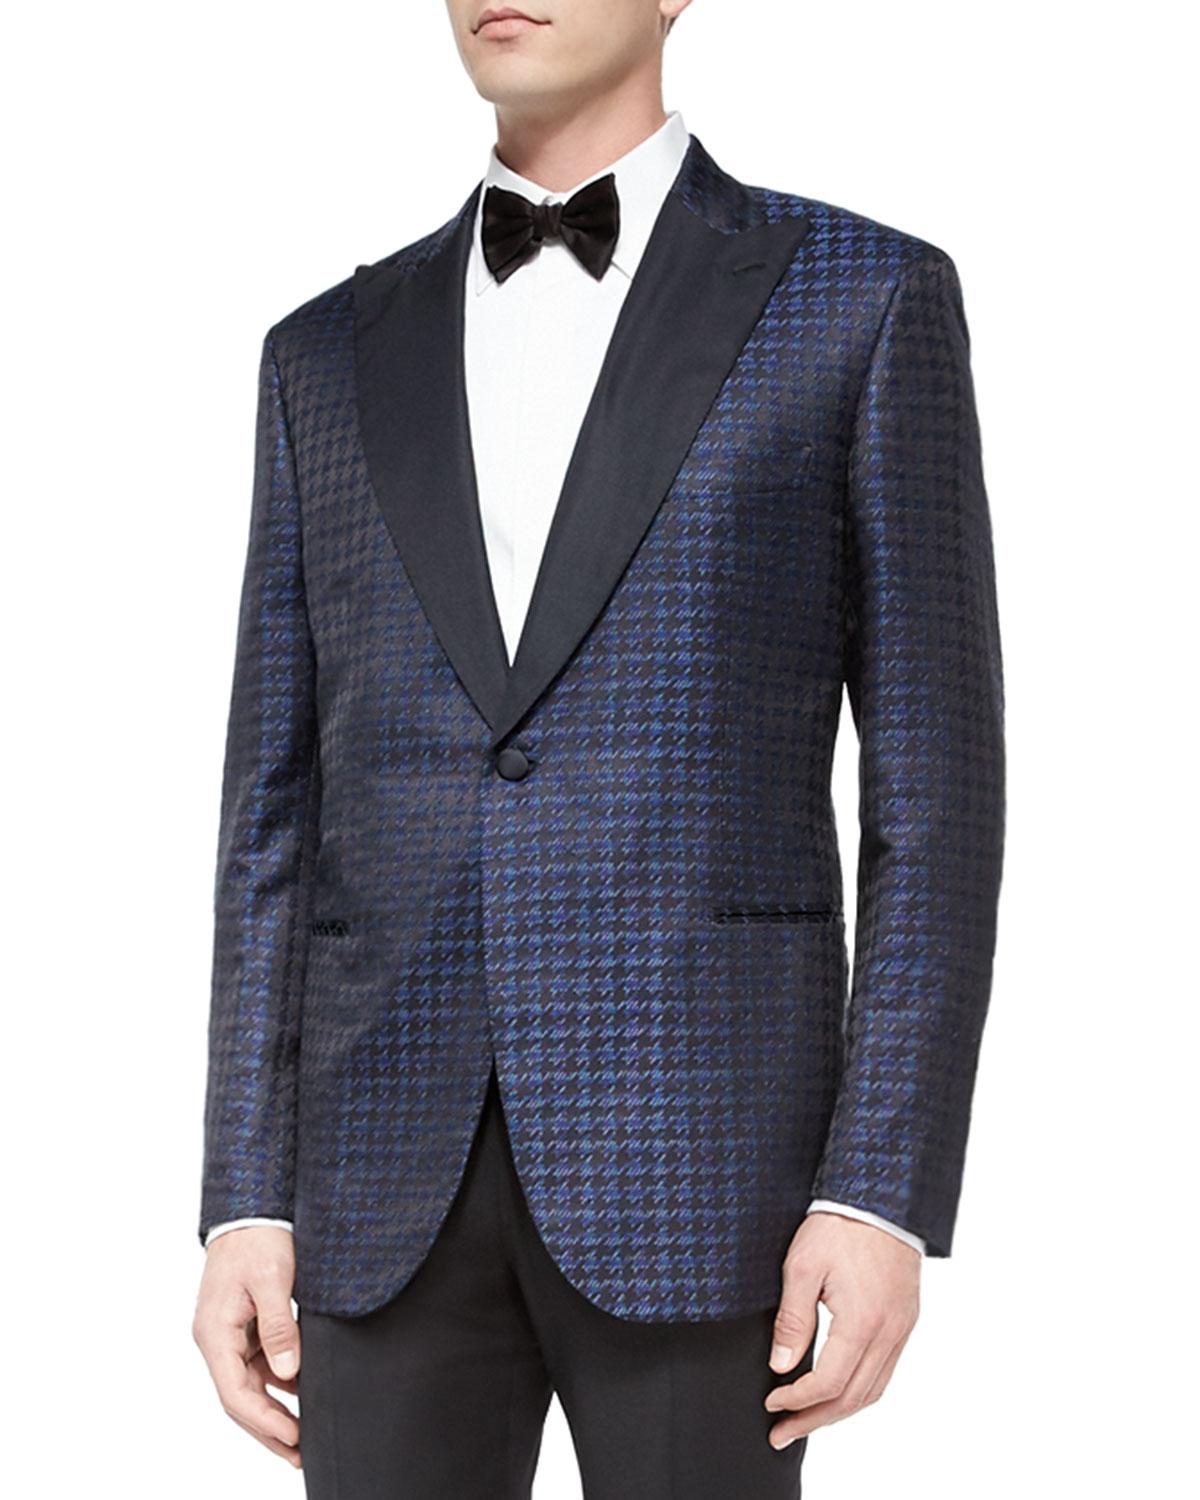 Lyst - Brioni Exaggerated Houndstooth Dinner Jacket in Blue for Men